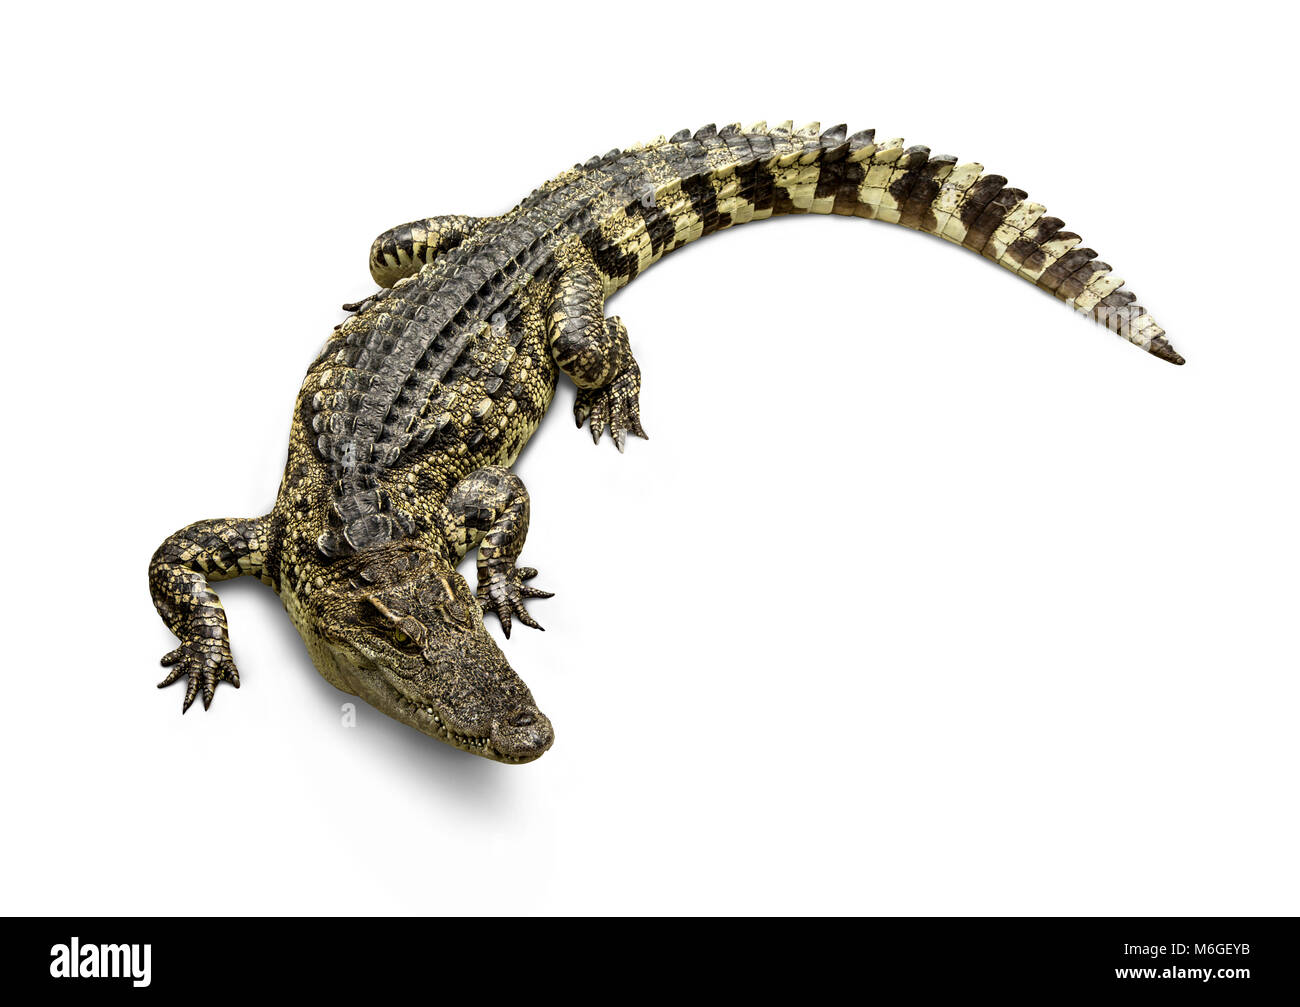 Freshwater crocodile Thai Species or Siamese crocodile ( Crocodylus siamensis ) view from above isolated on white background. Stock Photo